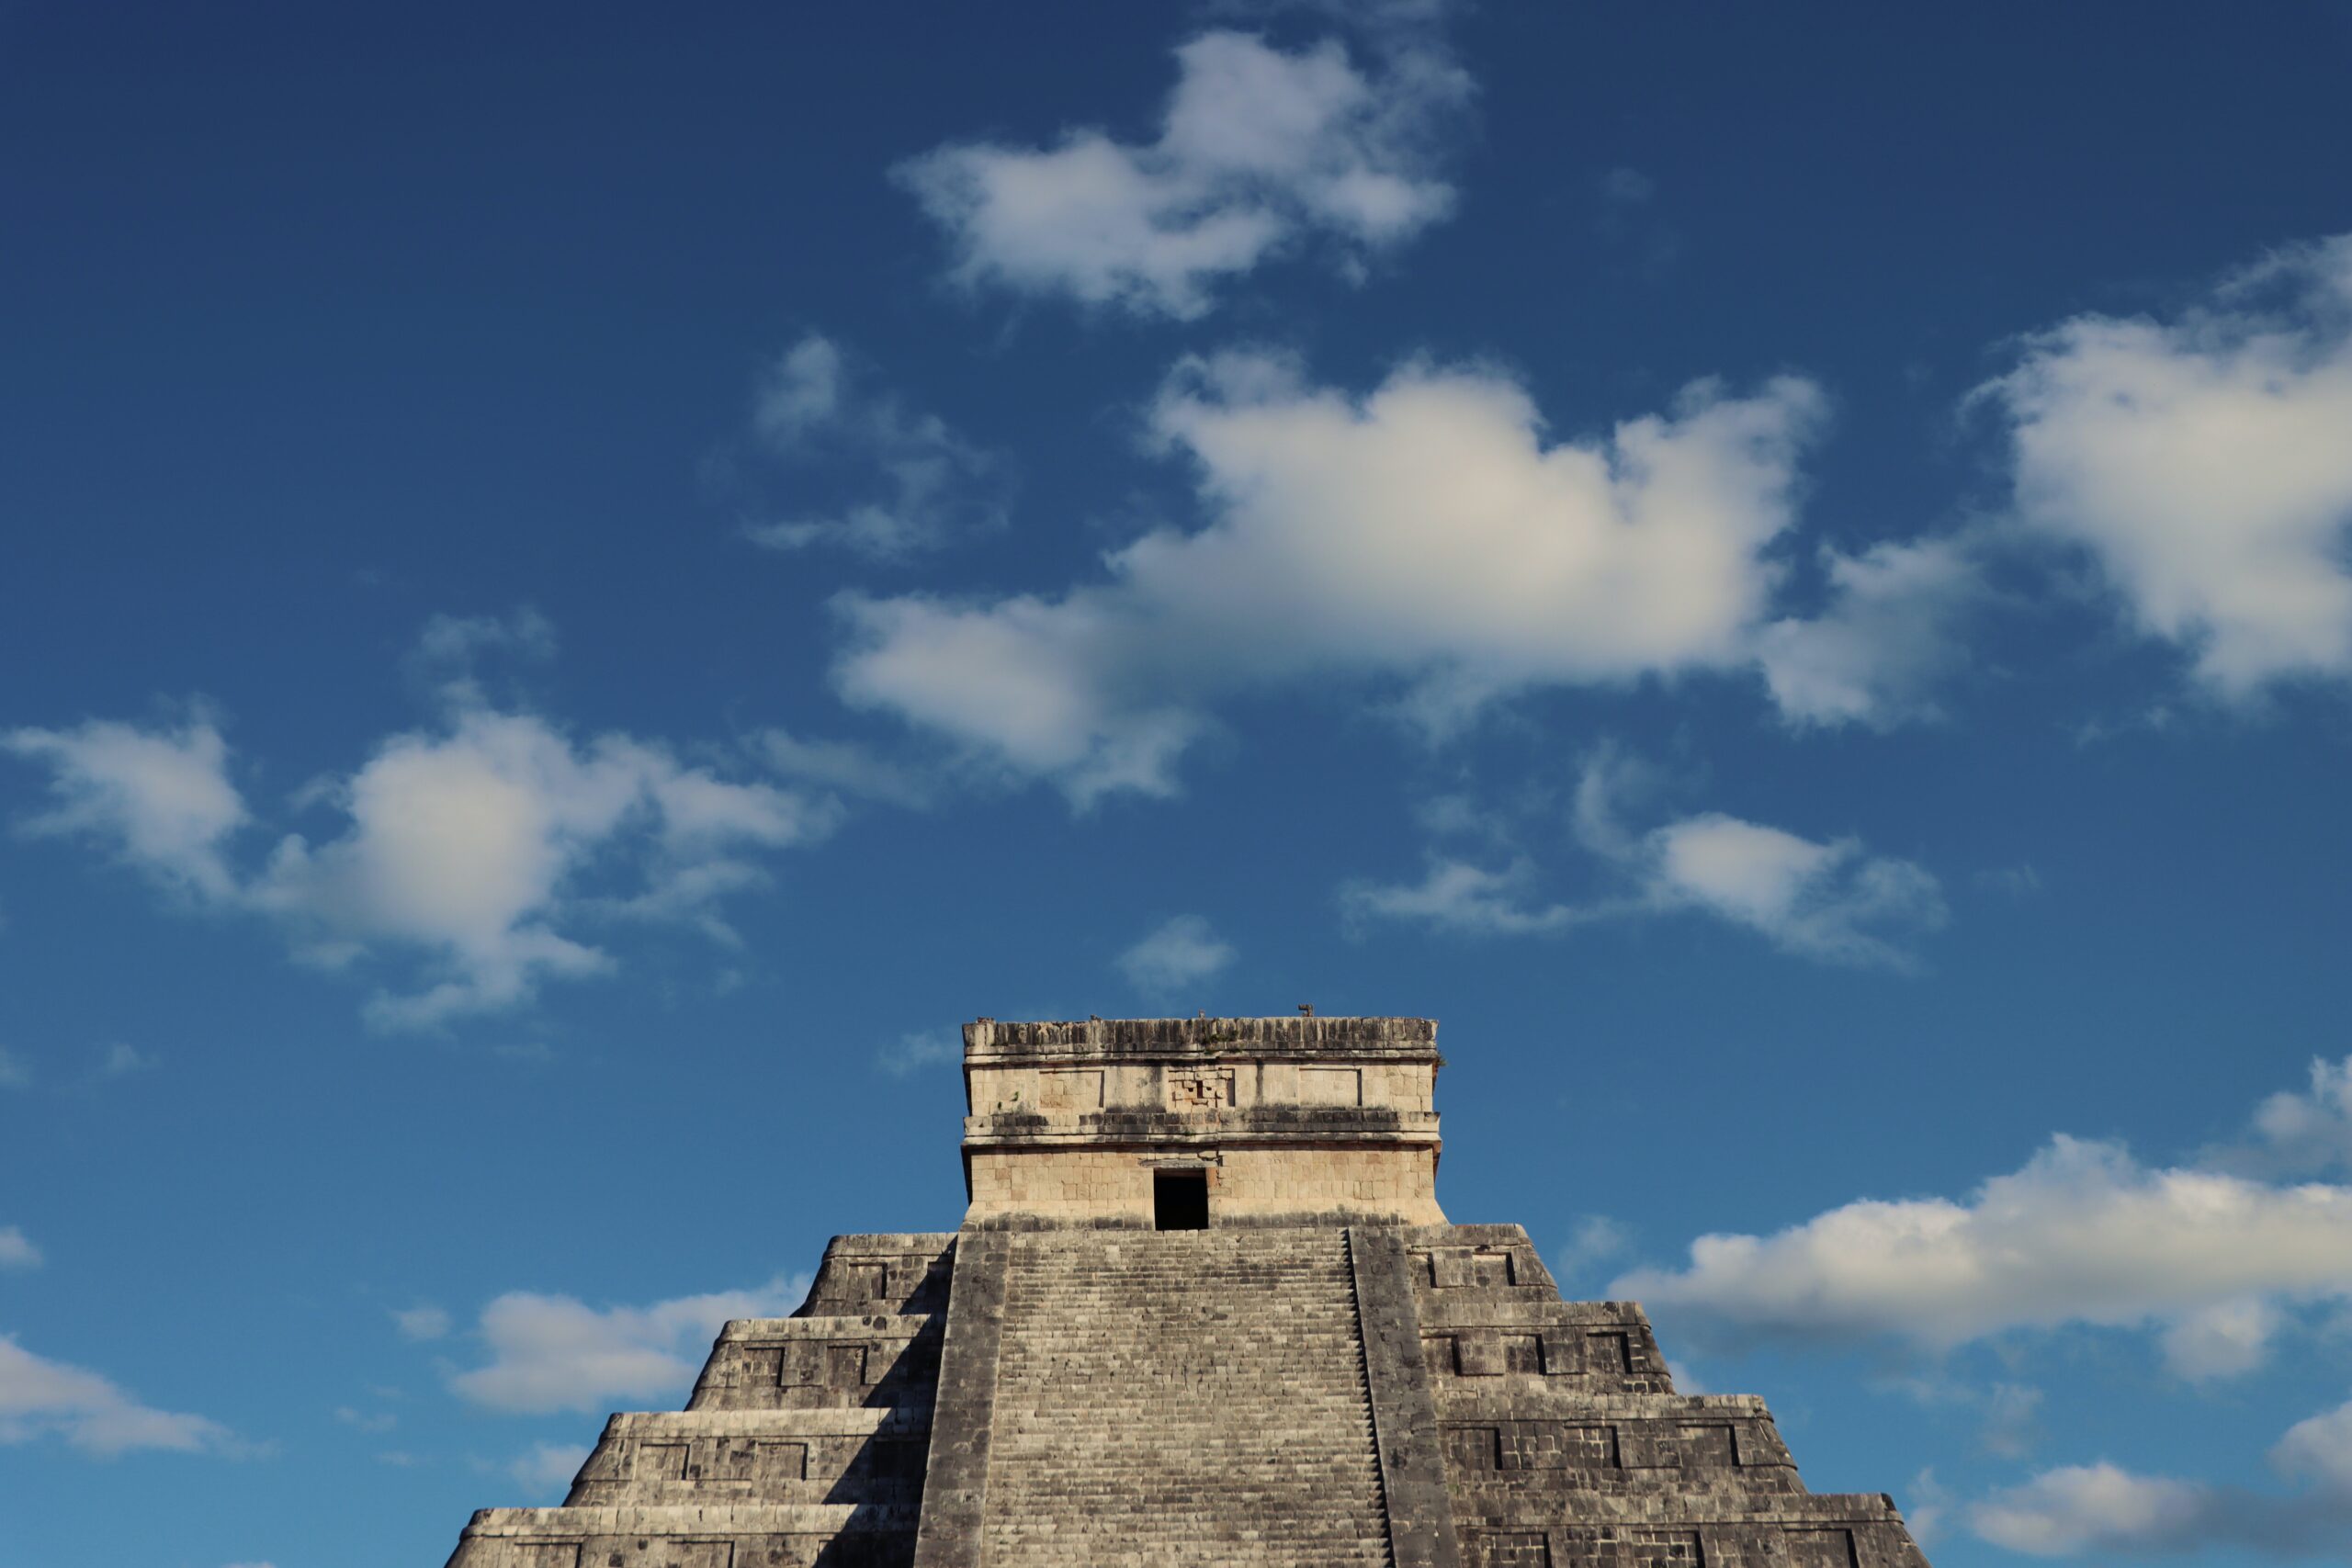 The pyramids of Mexico are vast and provide a deeper look into the history of the country.
pictured: The top of a pyramid in Mexico with a clear blue sky in the background